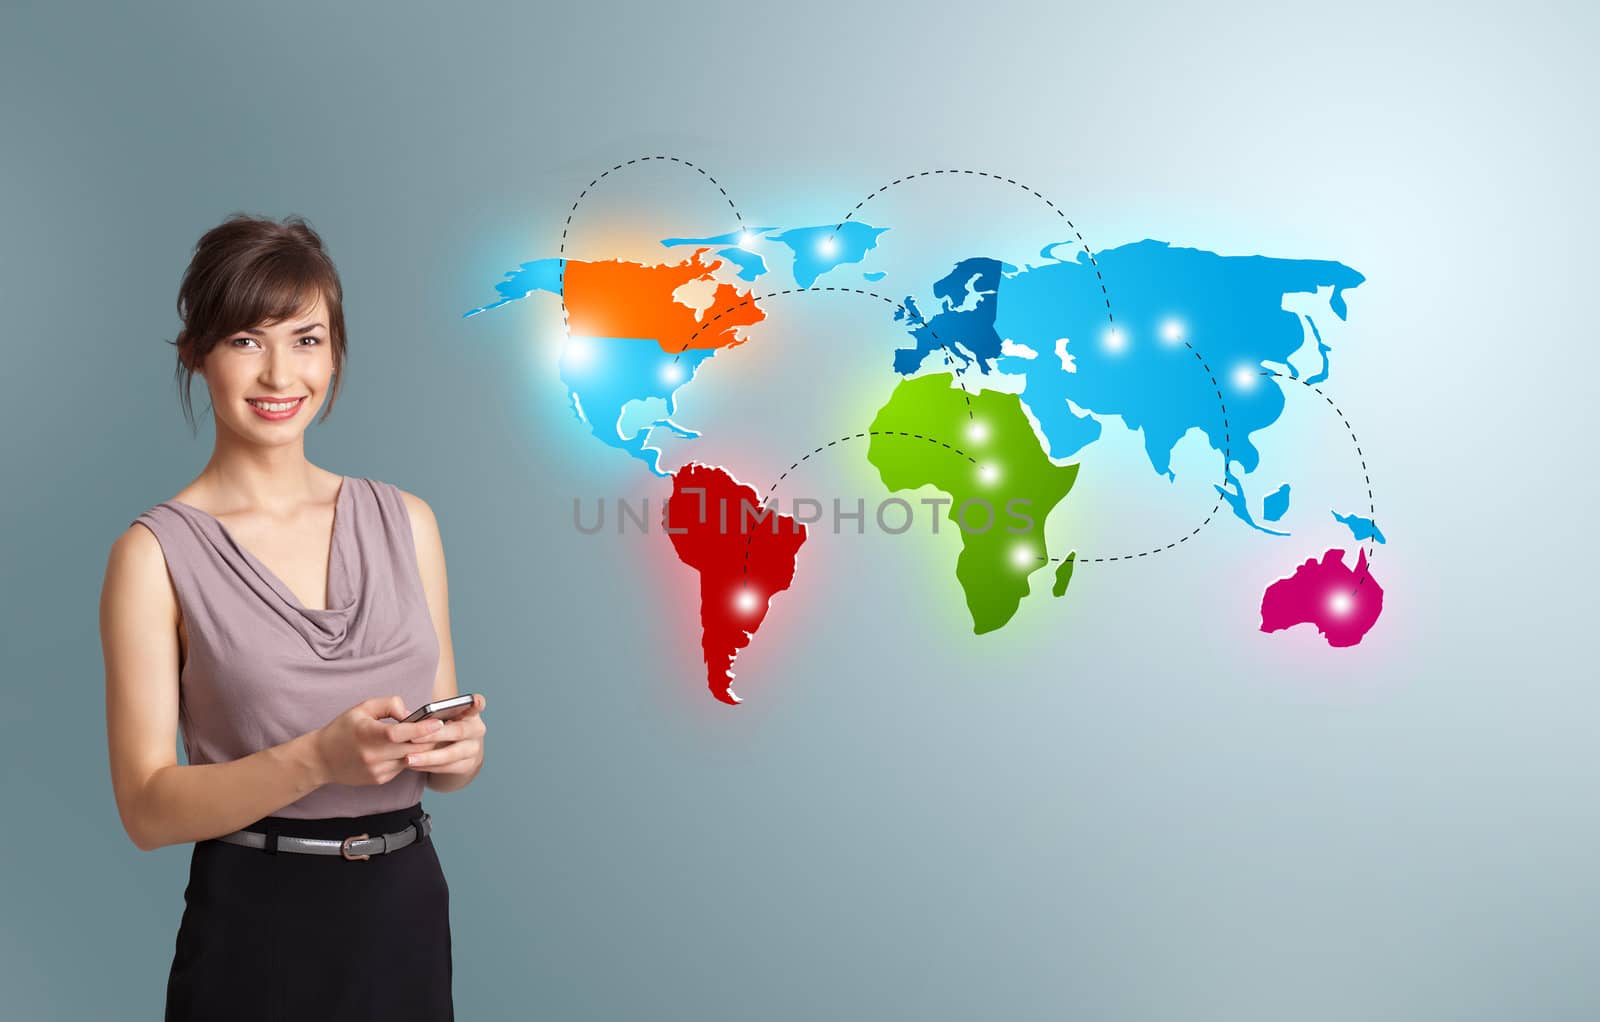 Beautiful young woman holding a phone and presenting colorful world map